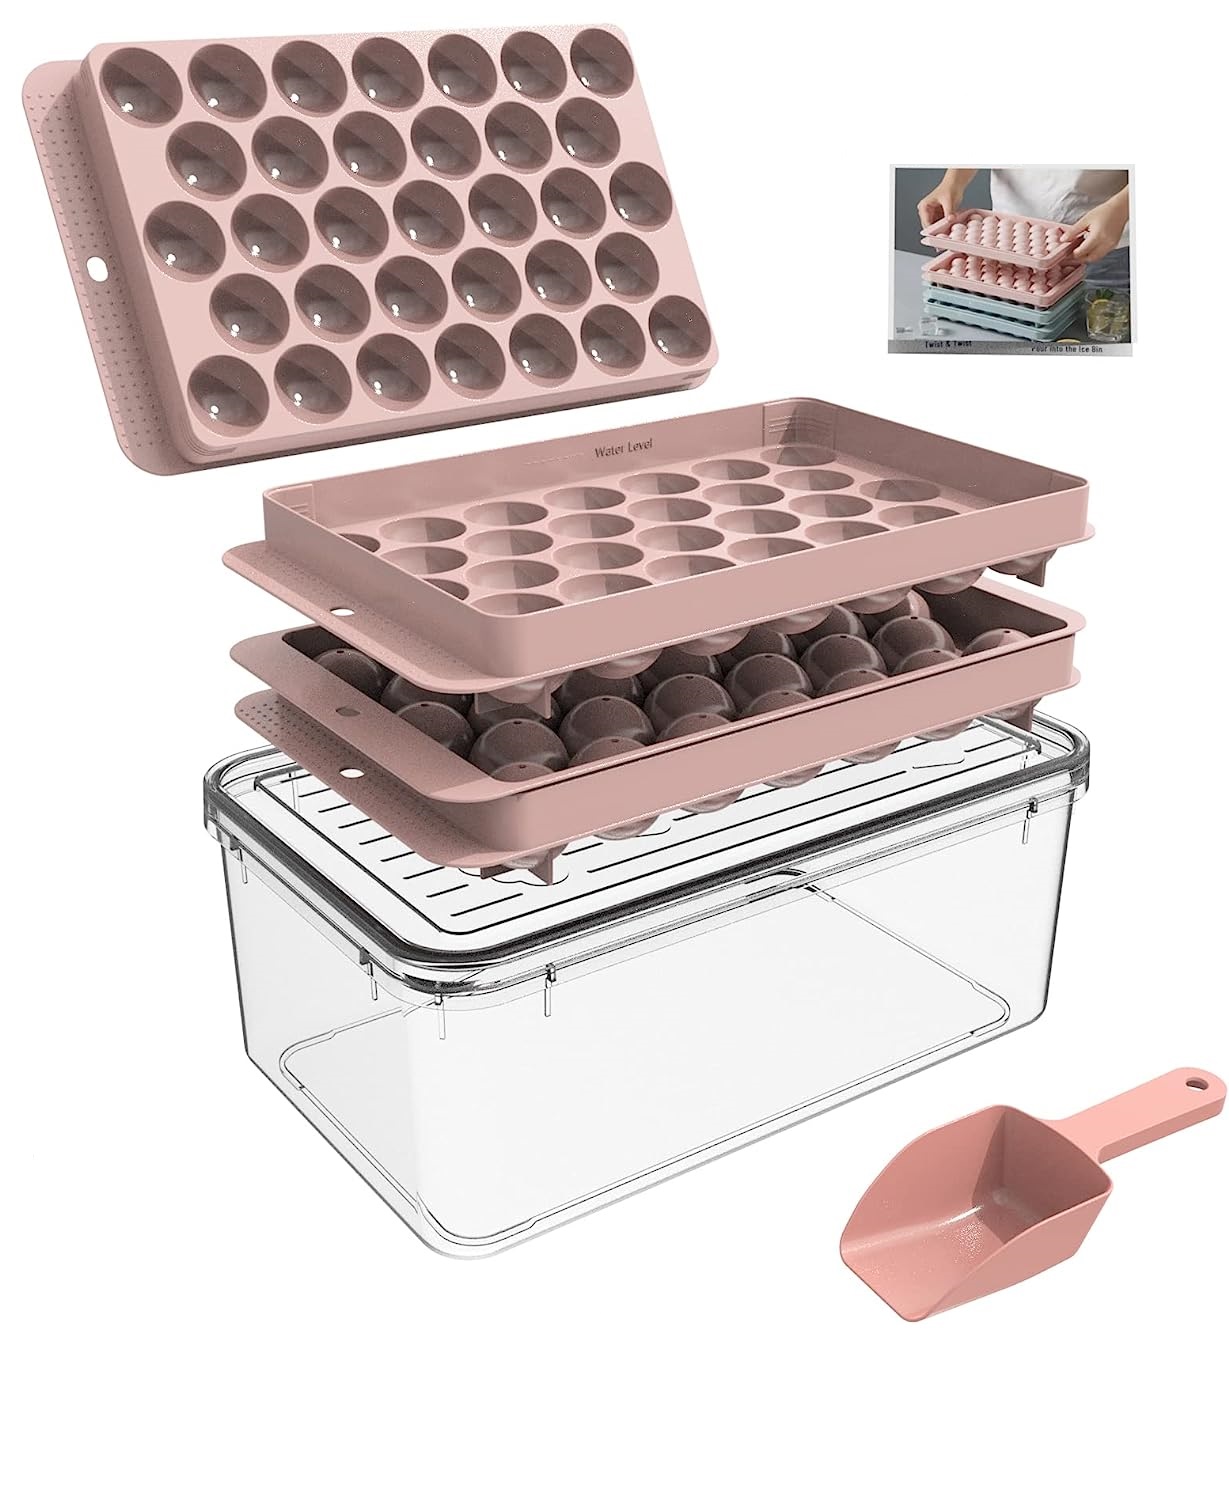 https://www.kooqie.com/images/Ice%20Cube%20Tray%20pink%20(1).jpg